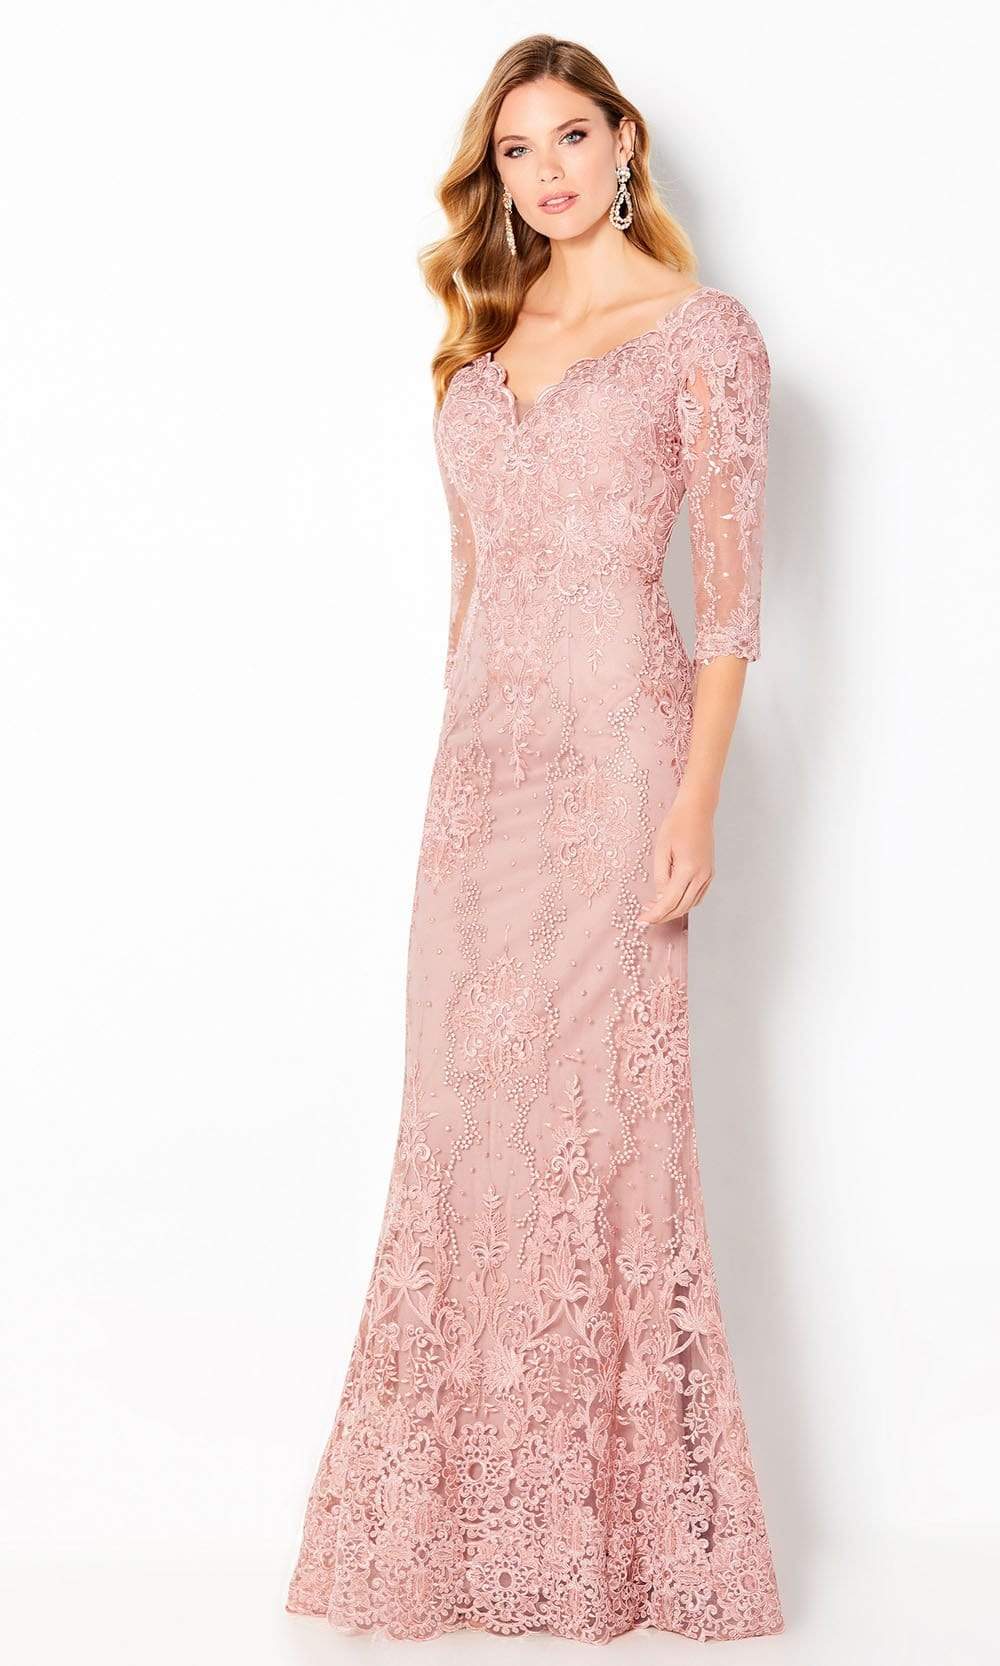 Mon Cheri - Corded Lace Mermaid Gown 220631 - 1 pc Rose In Size 6 Available CCSALE 6 / Rose